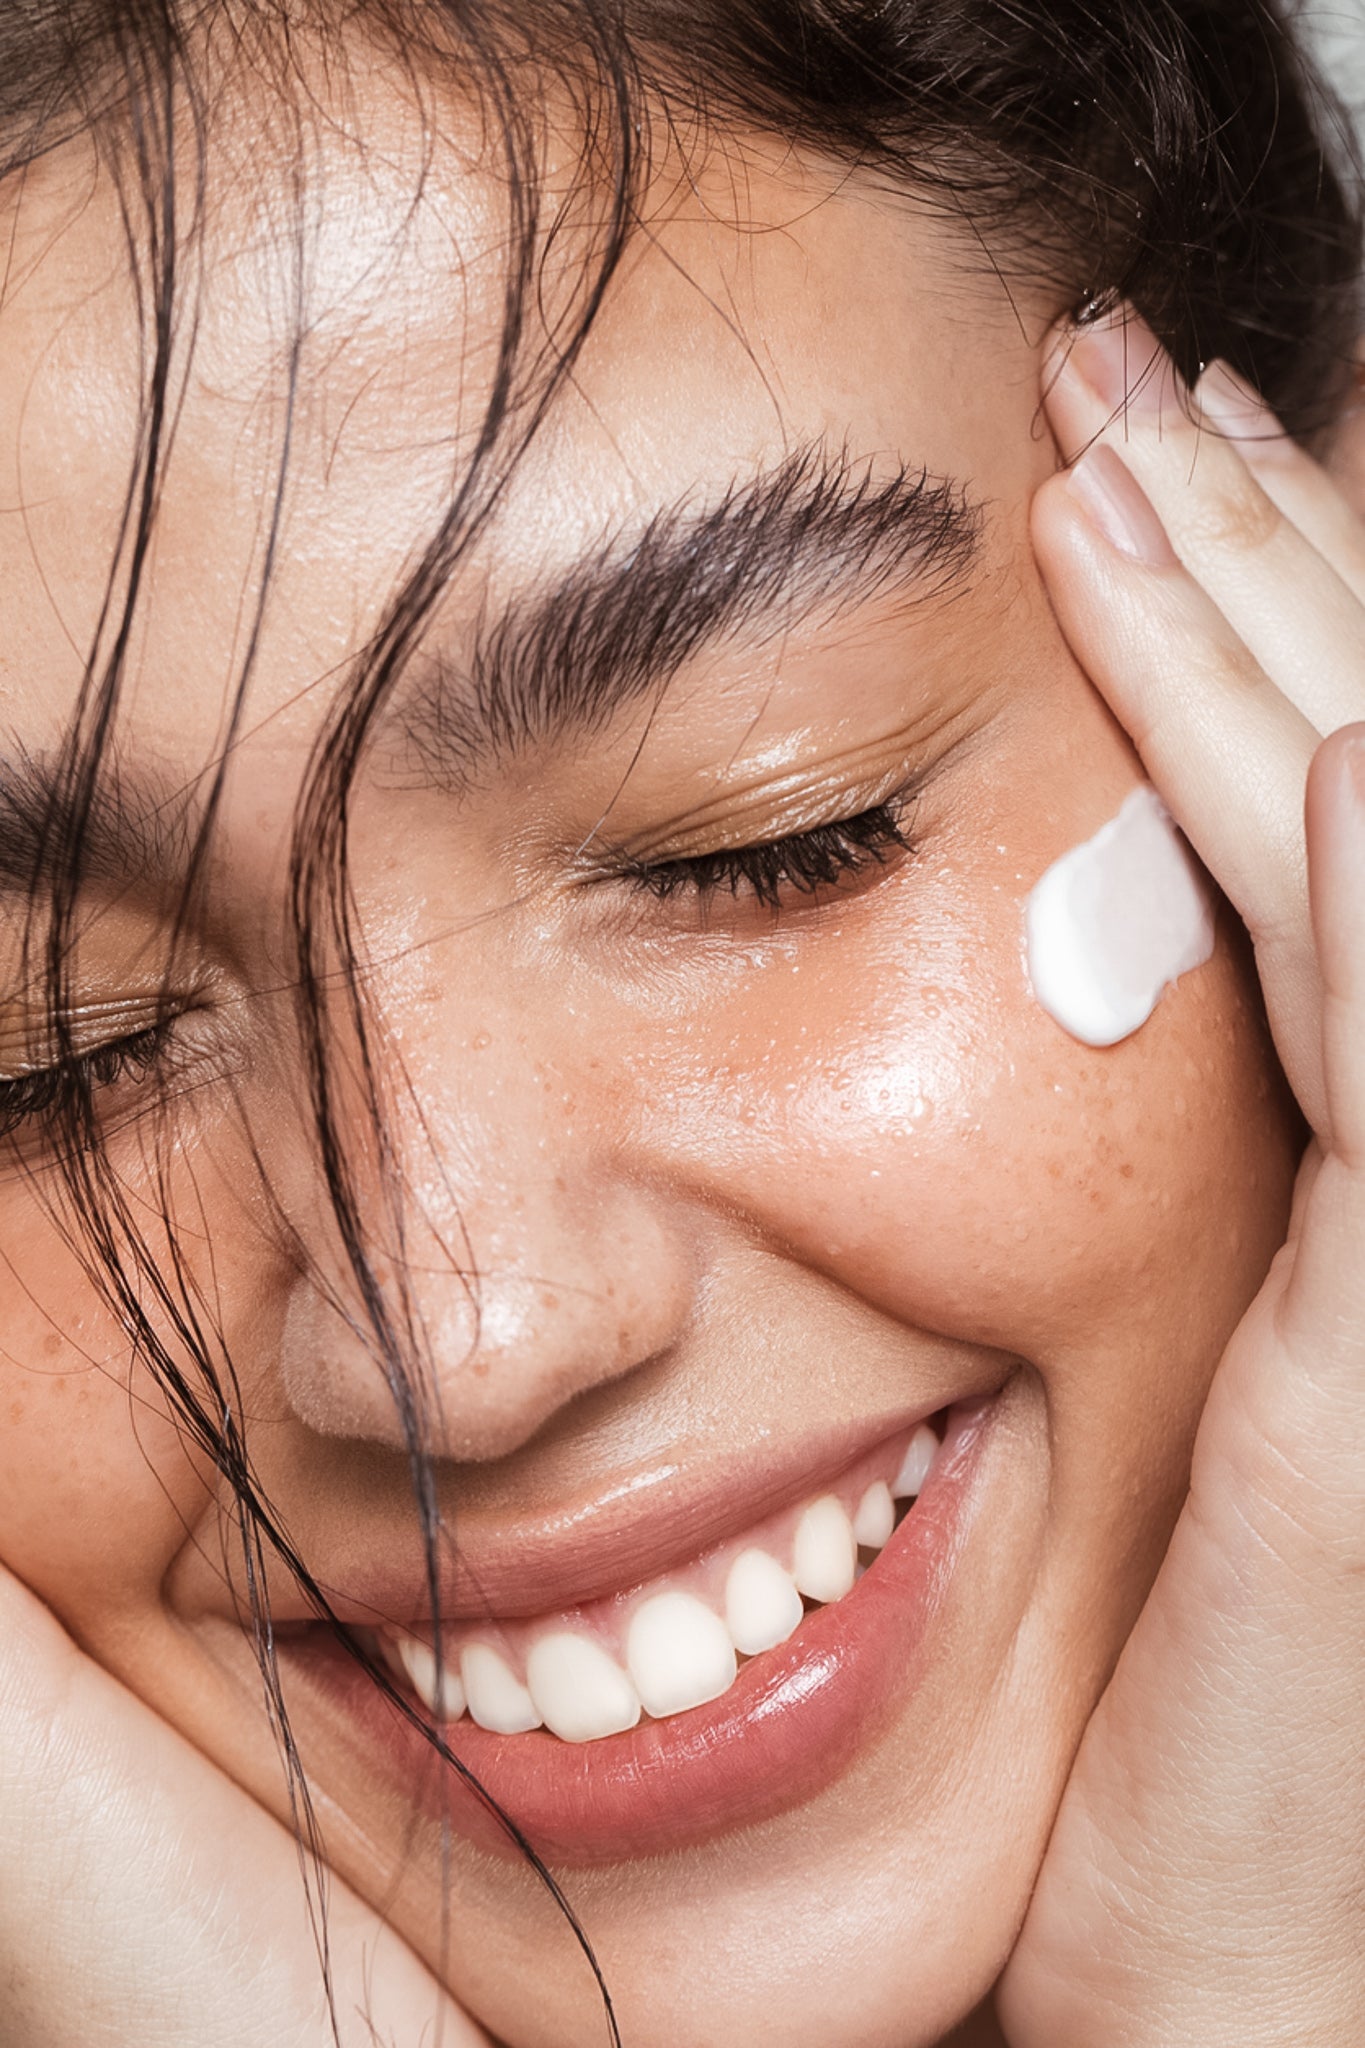 Decoding skincare: What's the score with 'Slugging'?